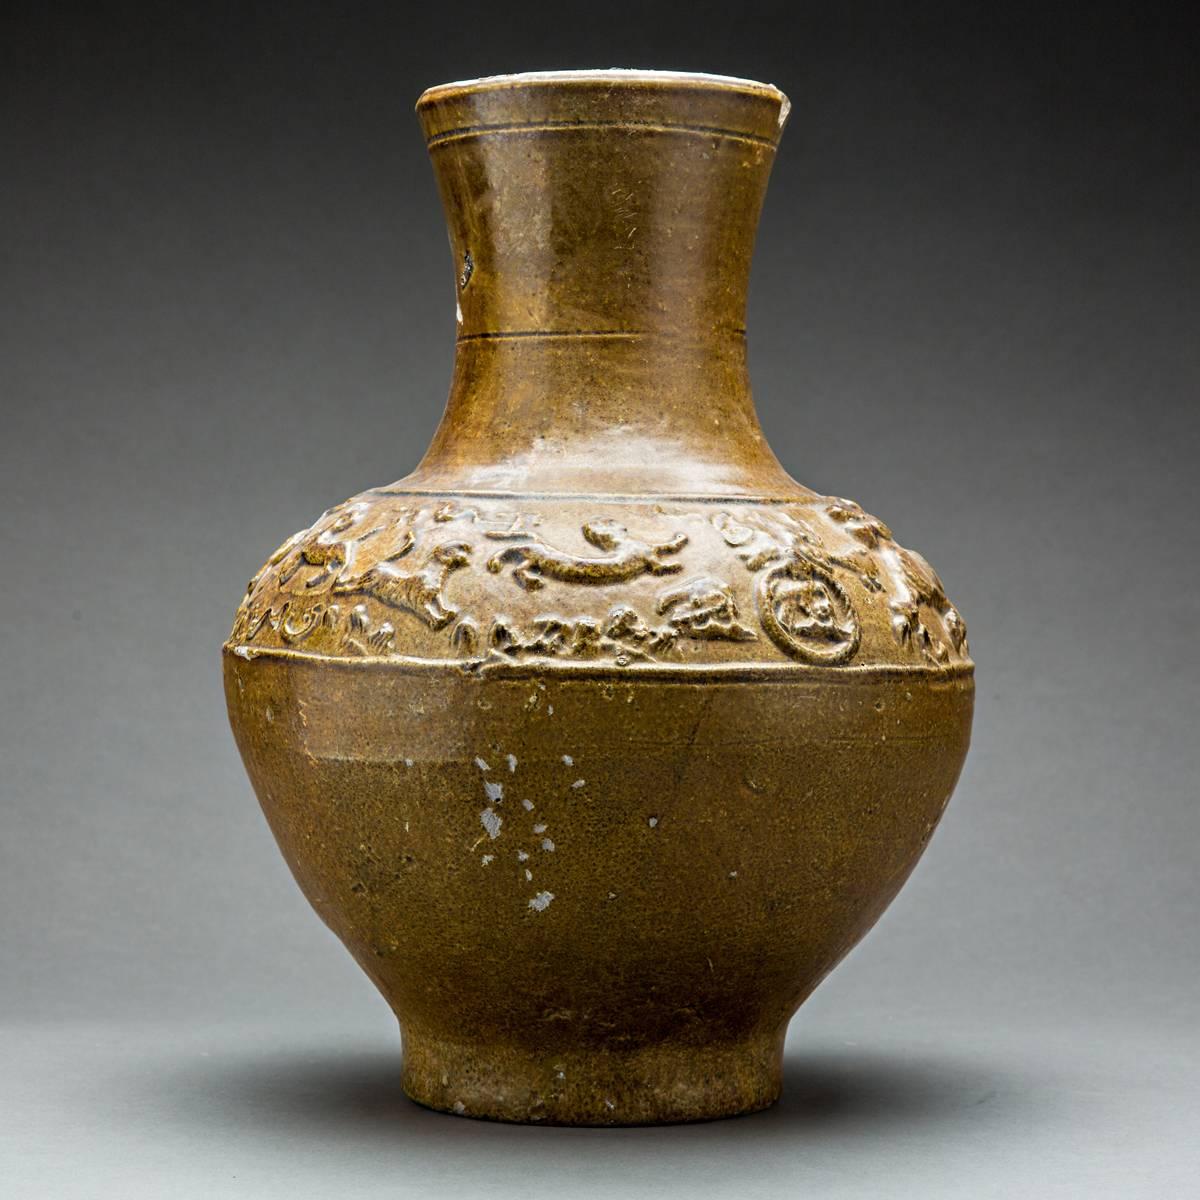 Buff earthenware with moulded decoration and straw-coloured lead glaze.

Similar in shape to contemporary bronze Hu vases , lead glazed ceramic versions emerged in Shaanxi during the second century BCE, mostly to replace their metal prototype in